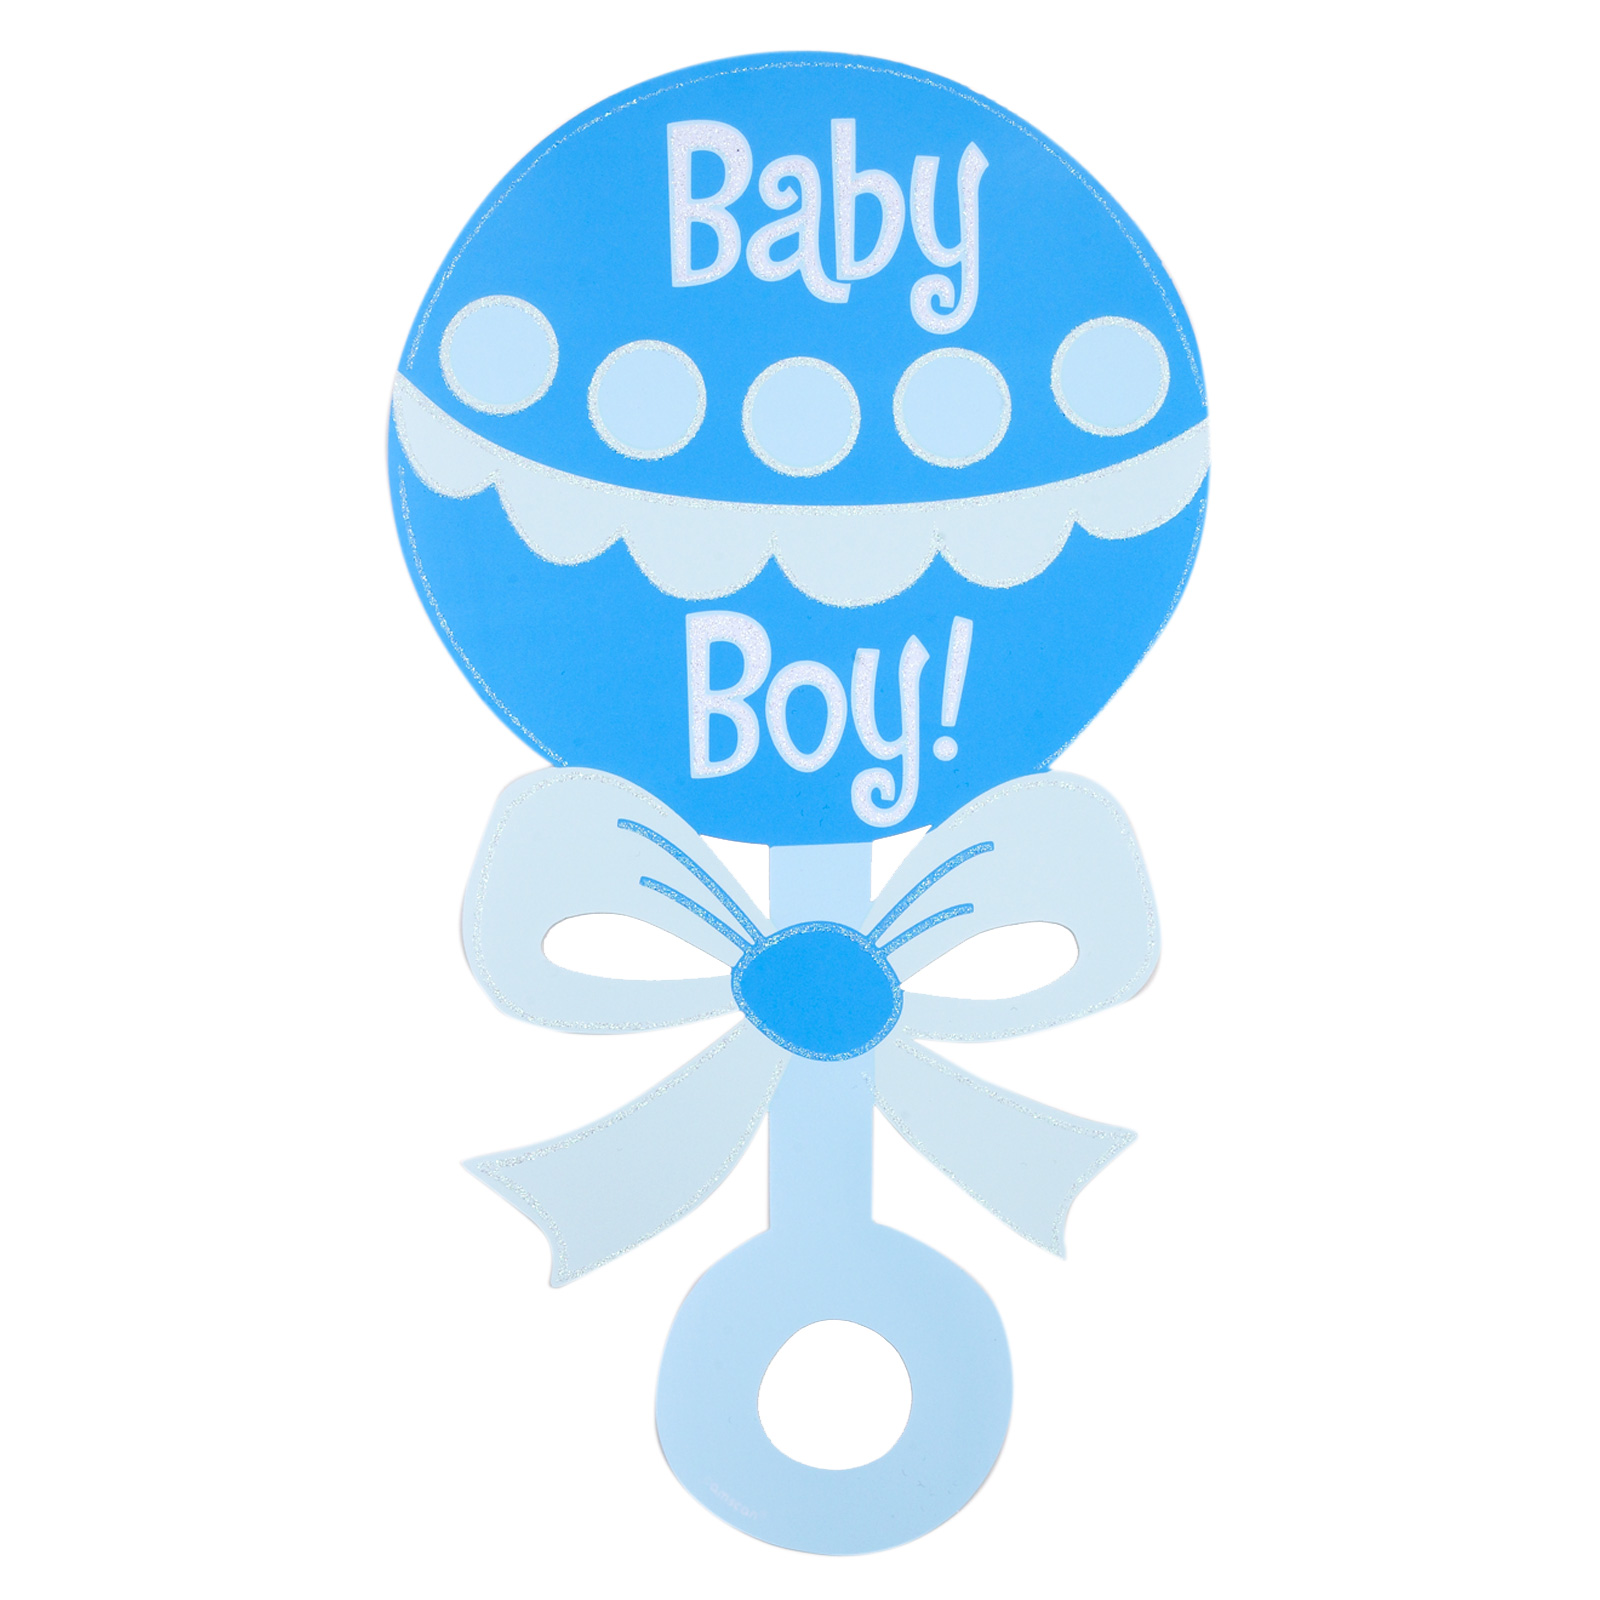 Baby rattle baby boy clipart 